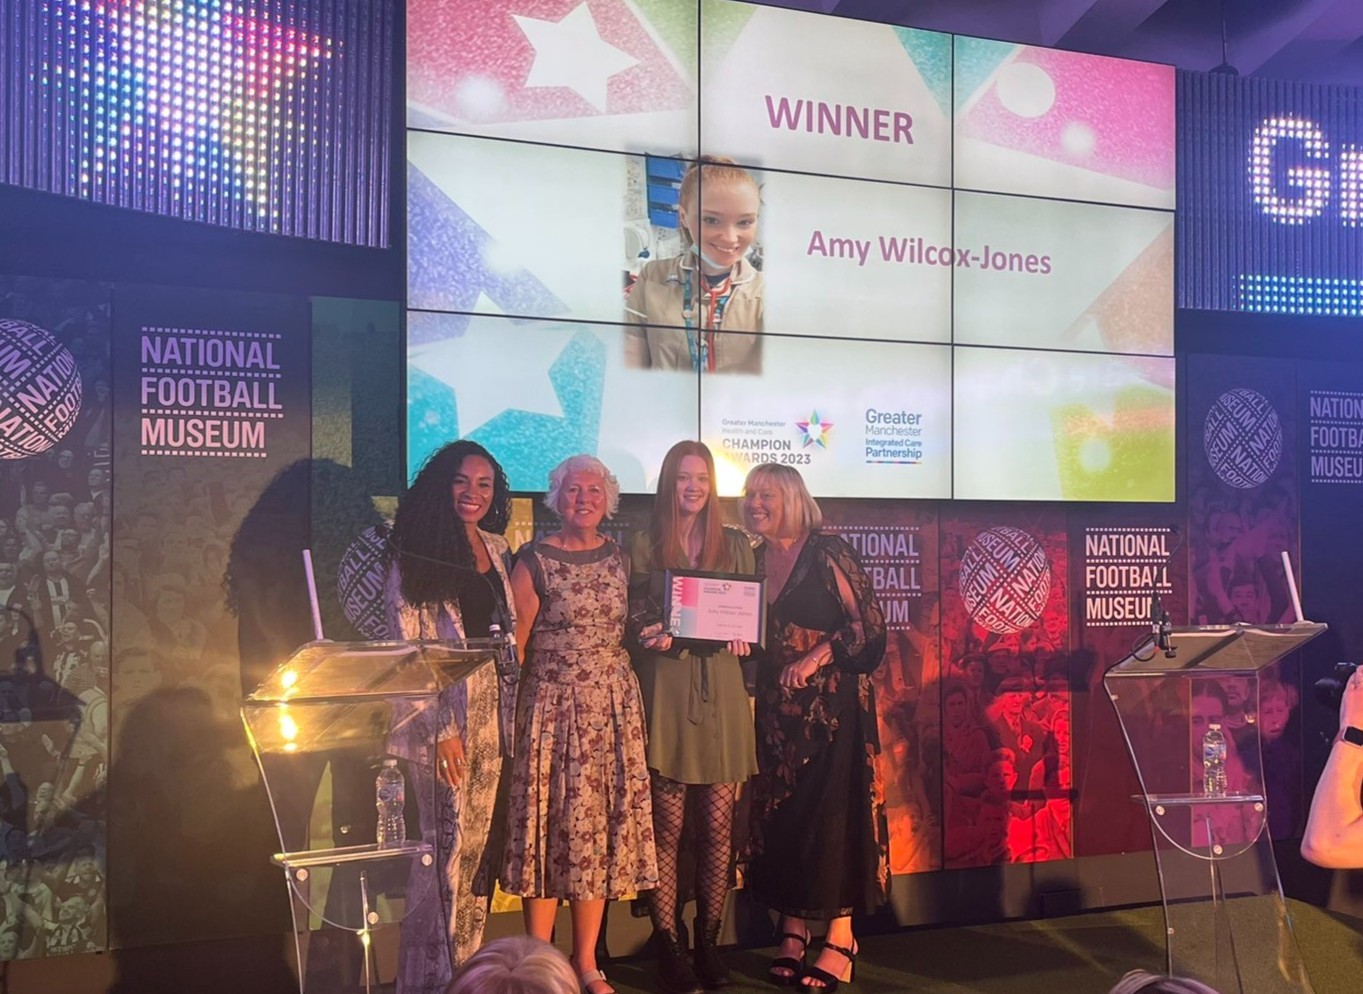 Amy Wilcox-Jones winning the Greater Manchester Health and Care Awards